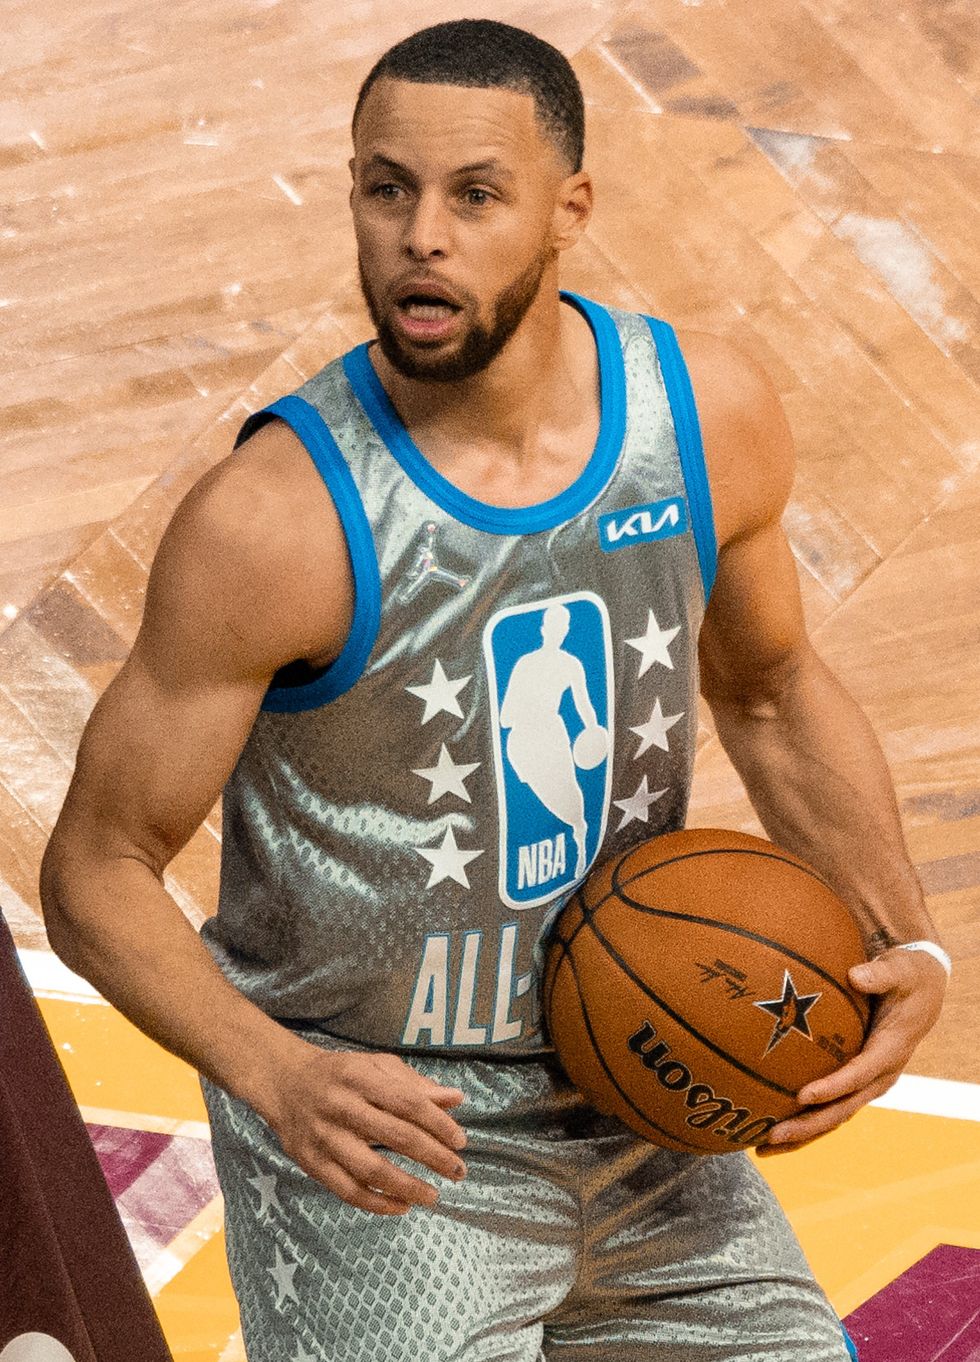 Basketball star Steph Curry at an All-Star competition